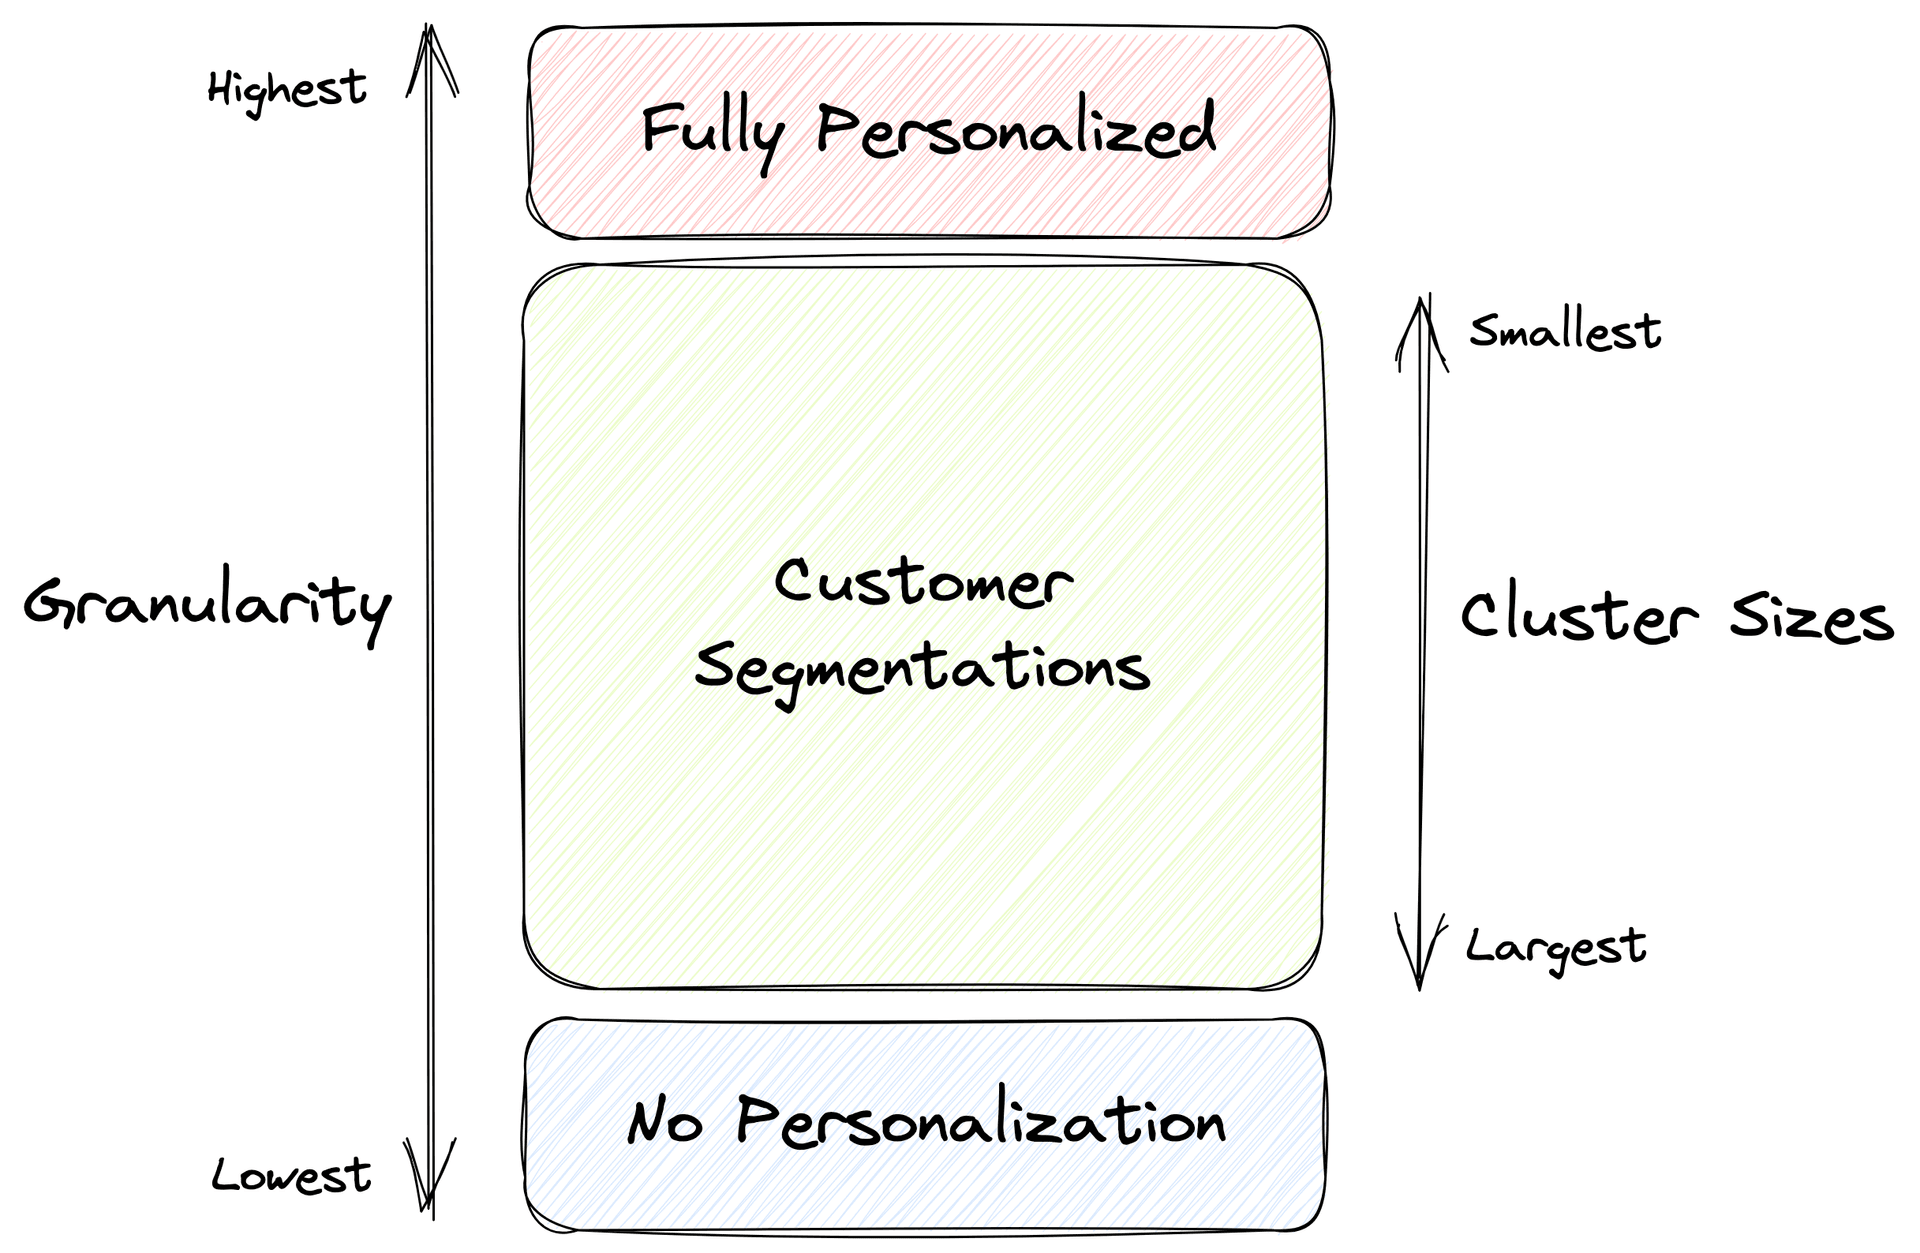 Levels of granularity when it comes personalization and how relates to the number of segments in your segmentation.